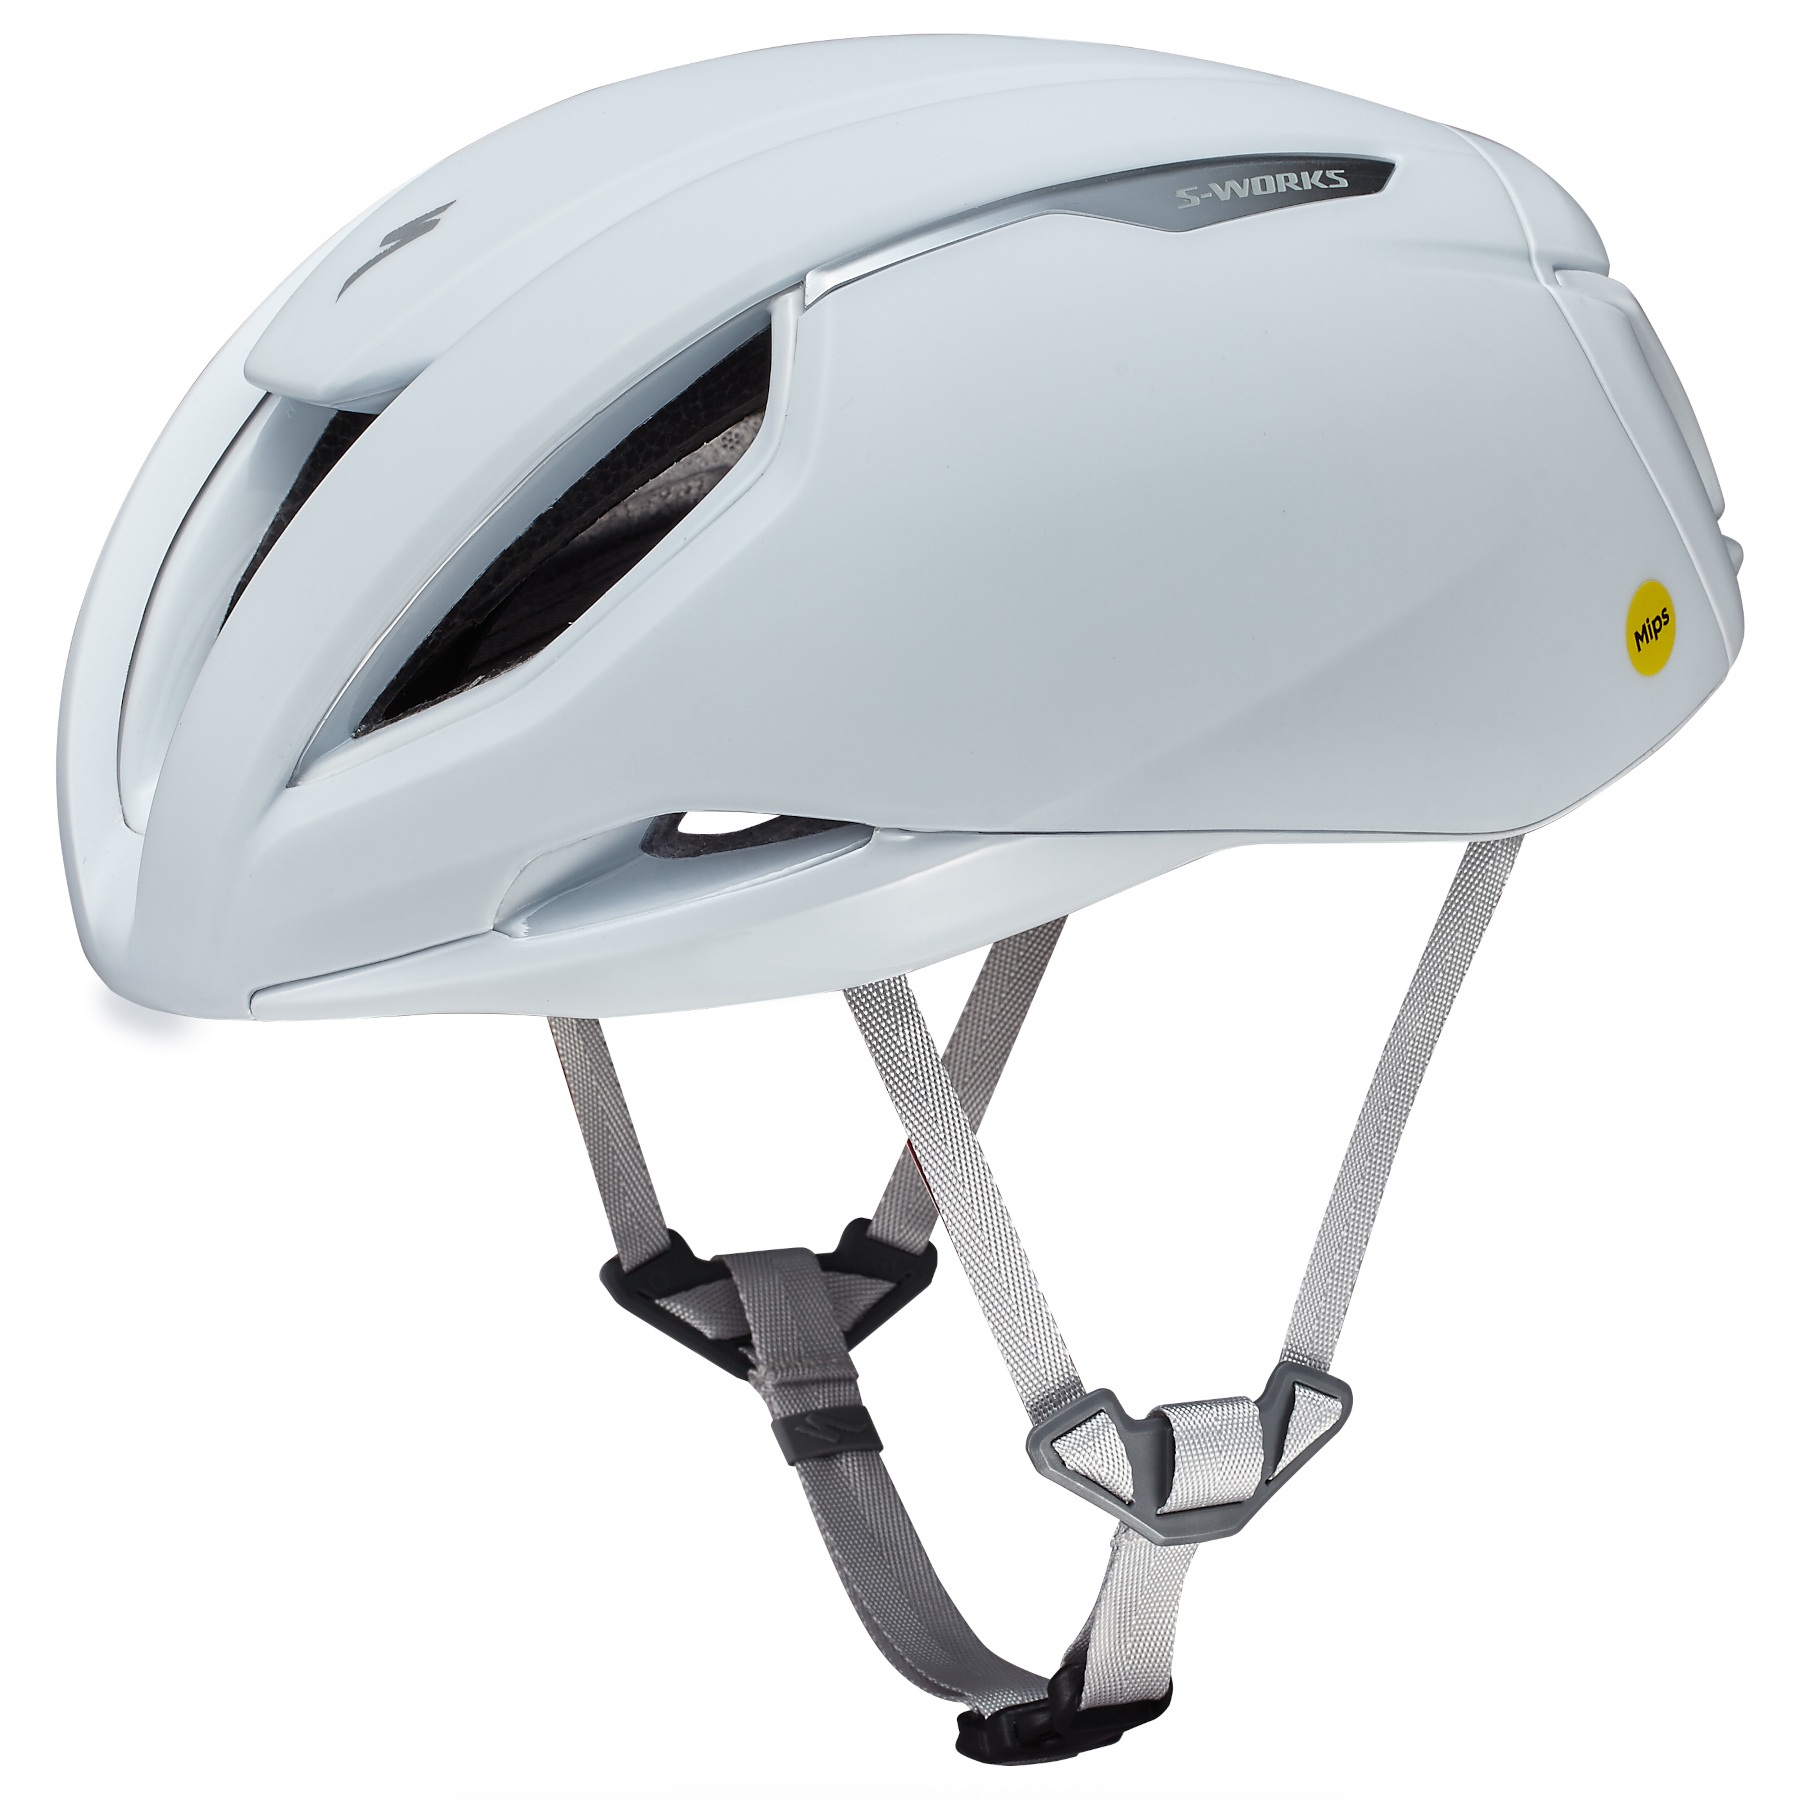 Picture of Specialized S-Works Evade 3 Road Helmet - White